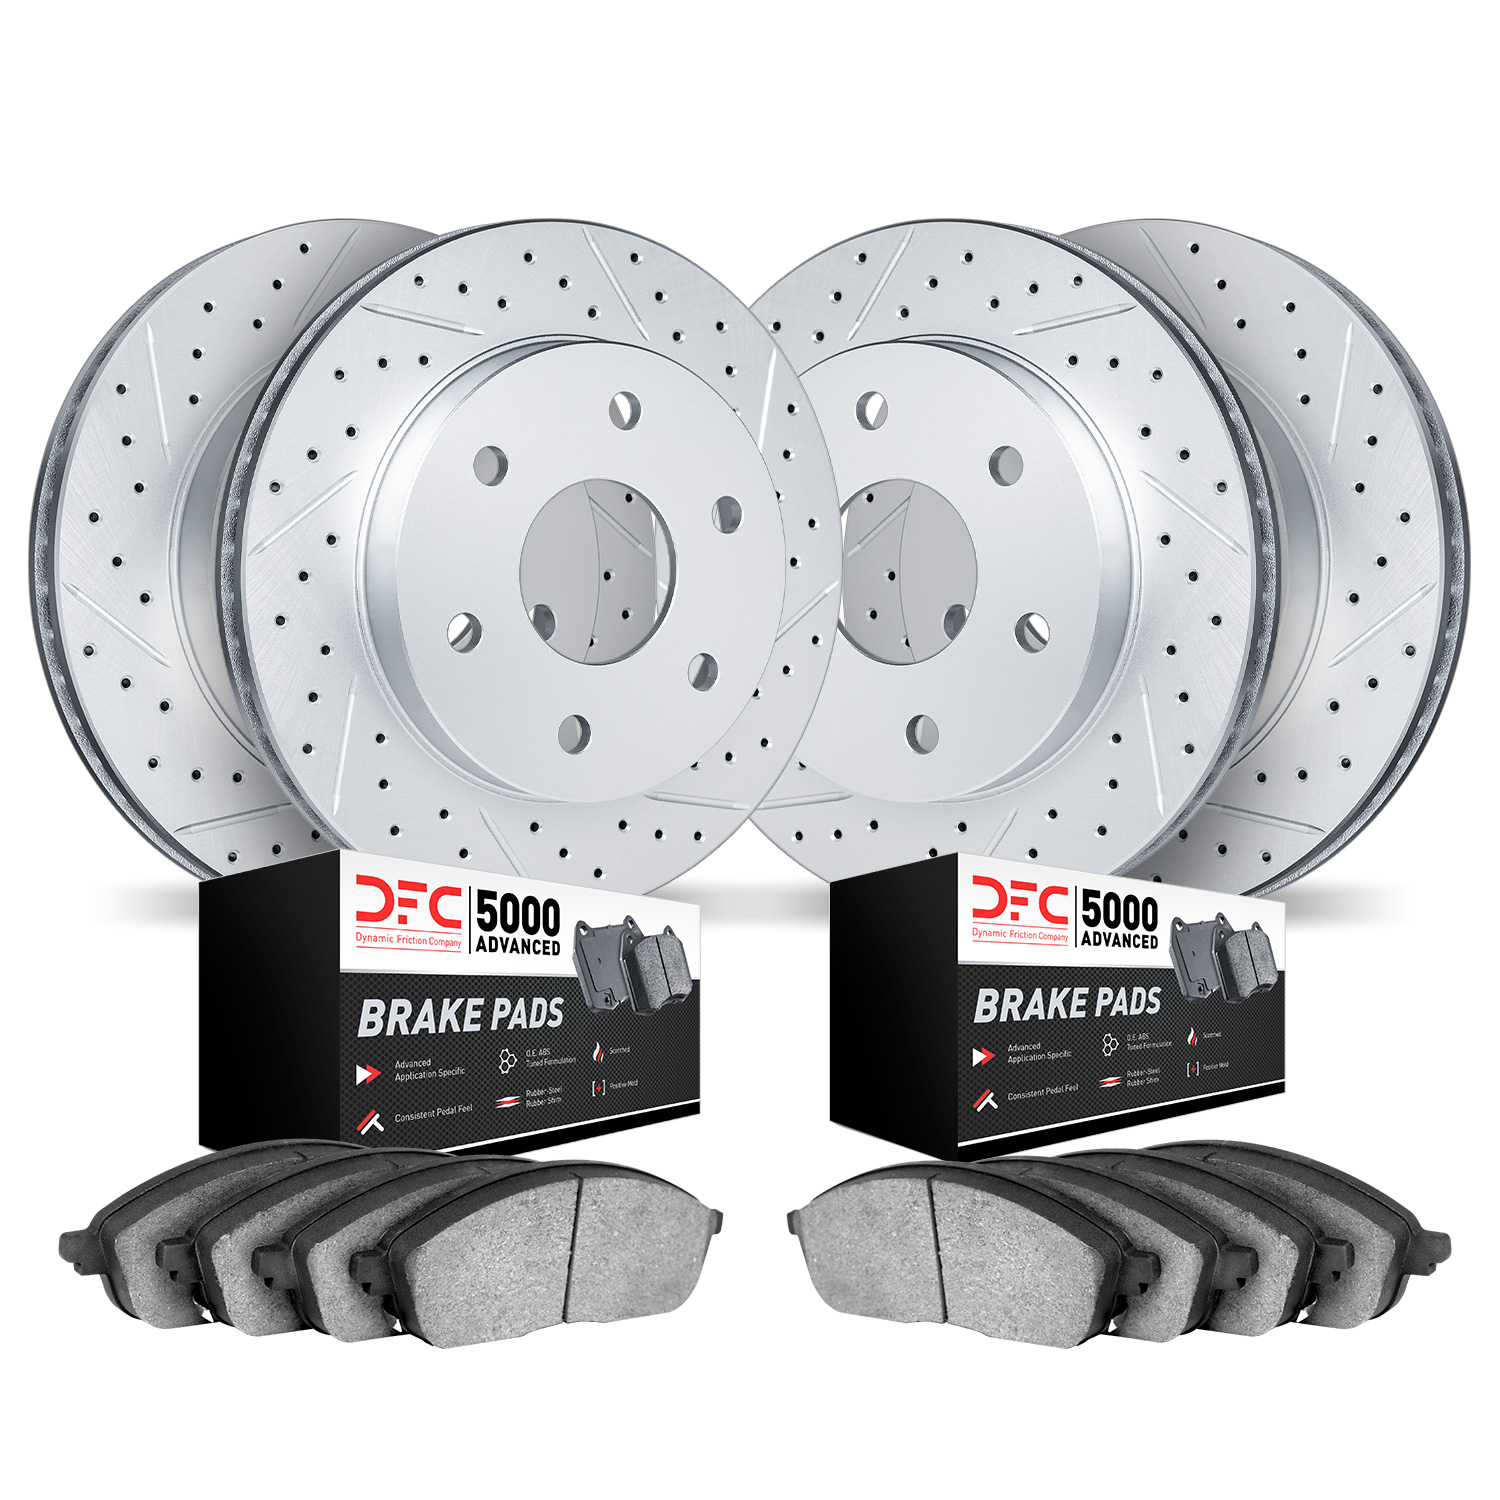 2504-54286 Geoperformance Drilled/Slotted Rotors w/5000 Advanced Brake Pads Kit, 2007-2009 Ford/Lincoln/Mercury/Mazda, Position: